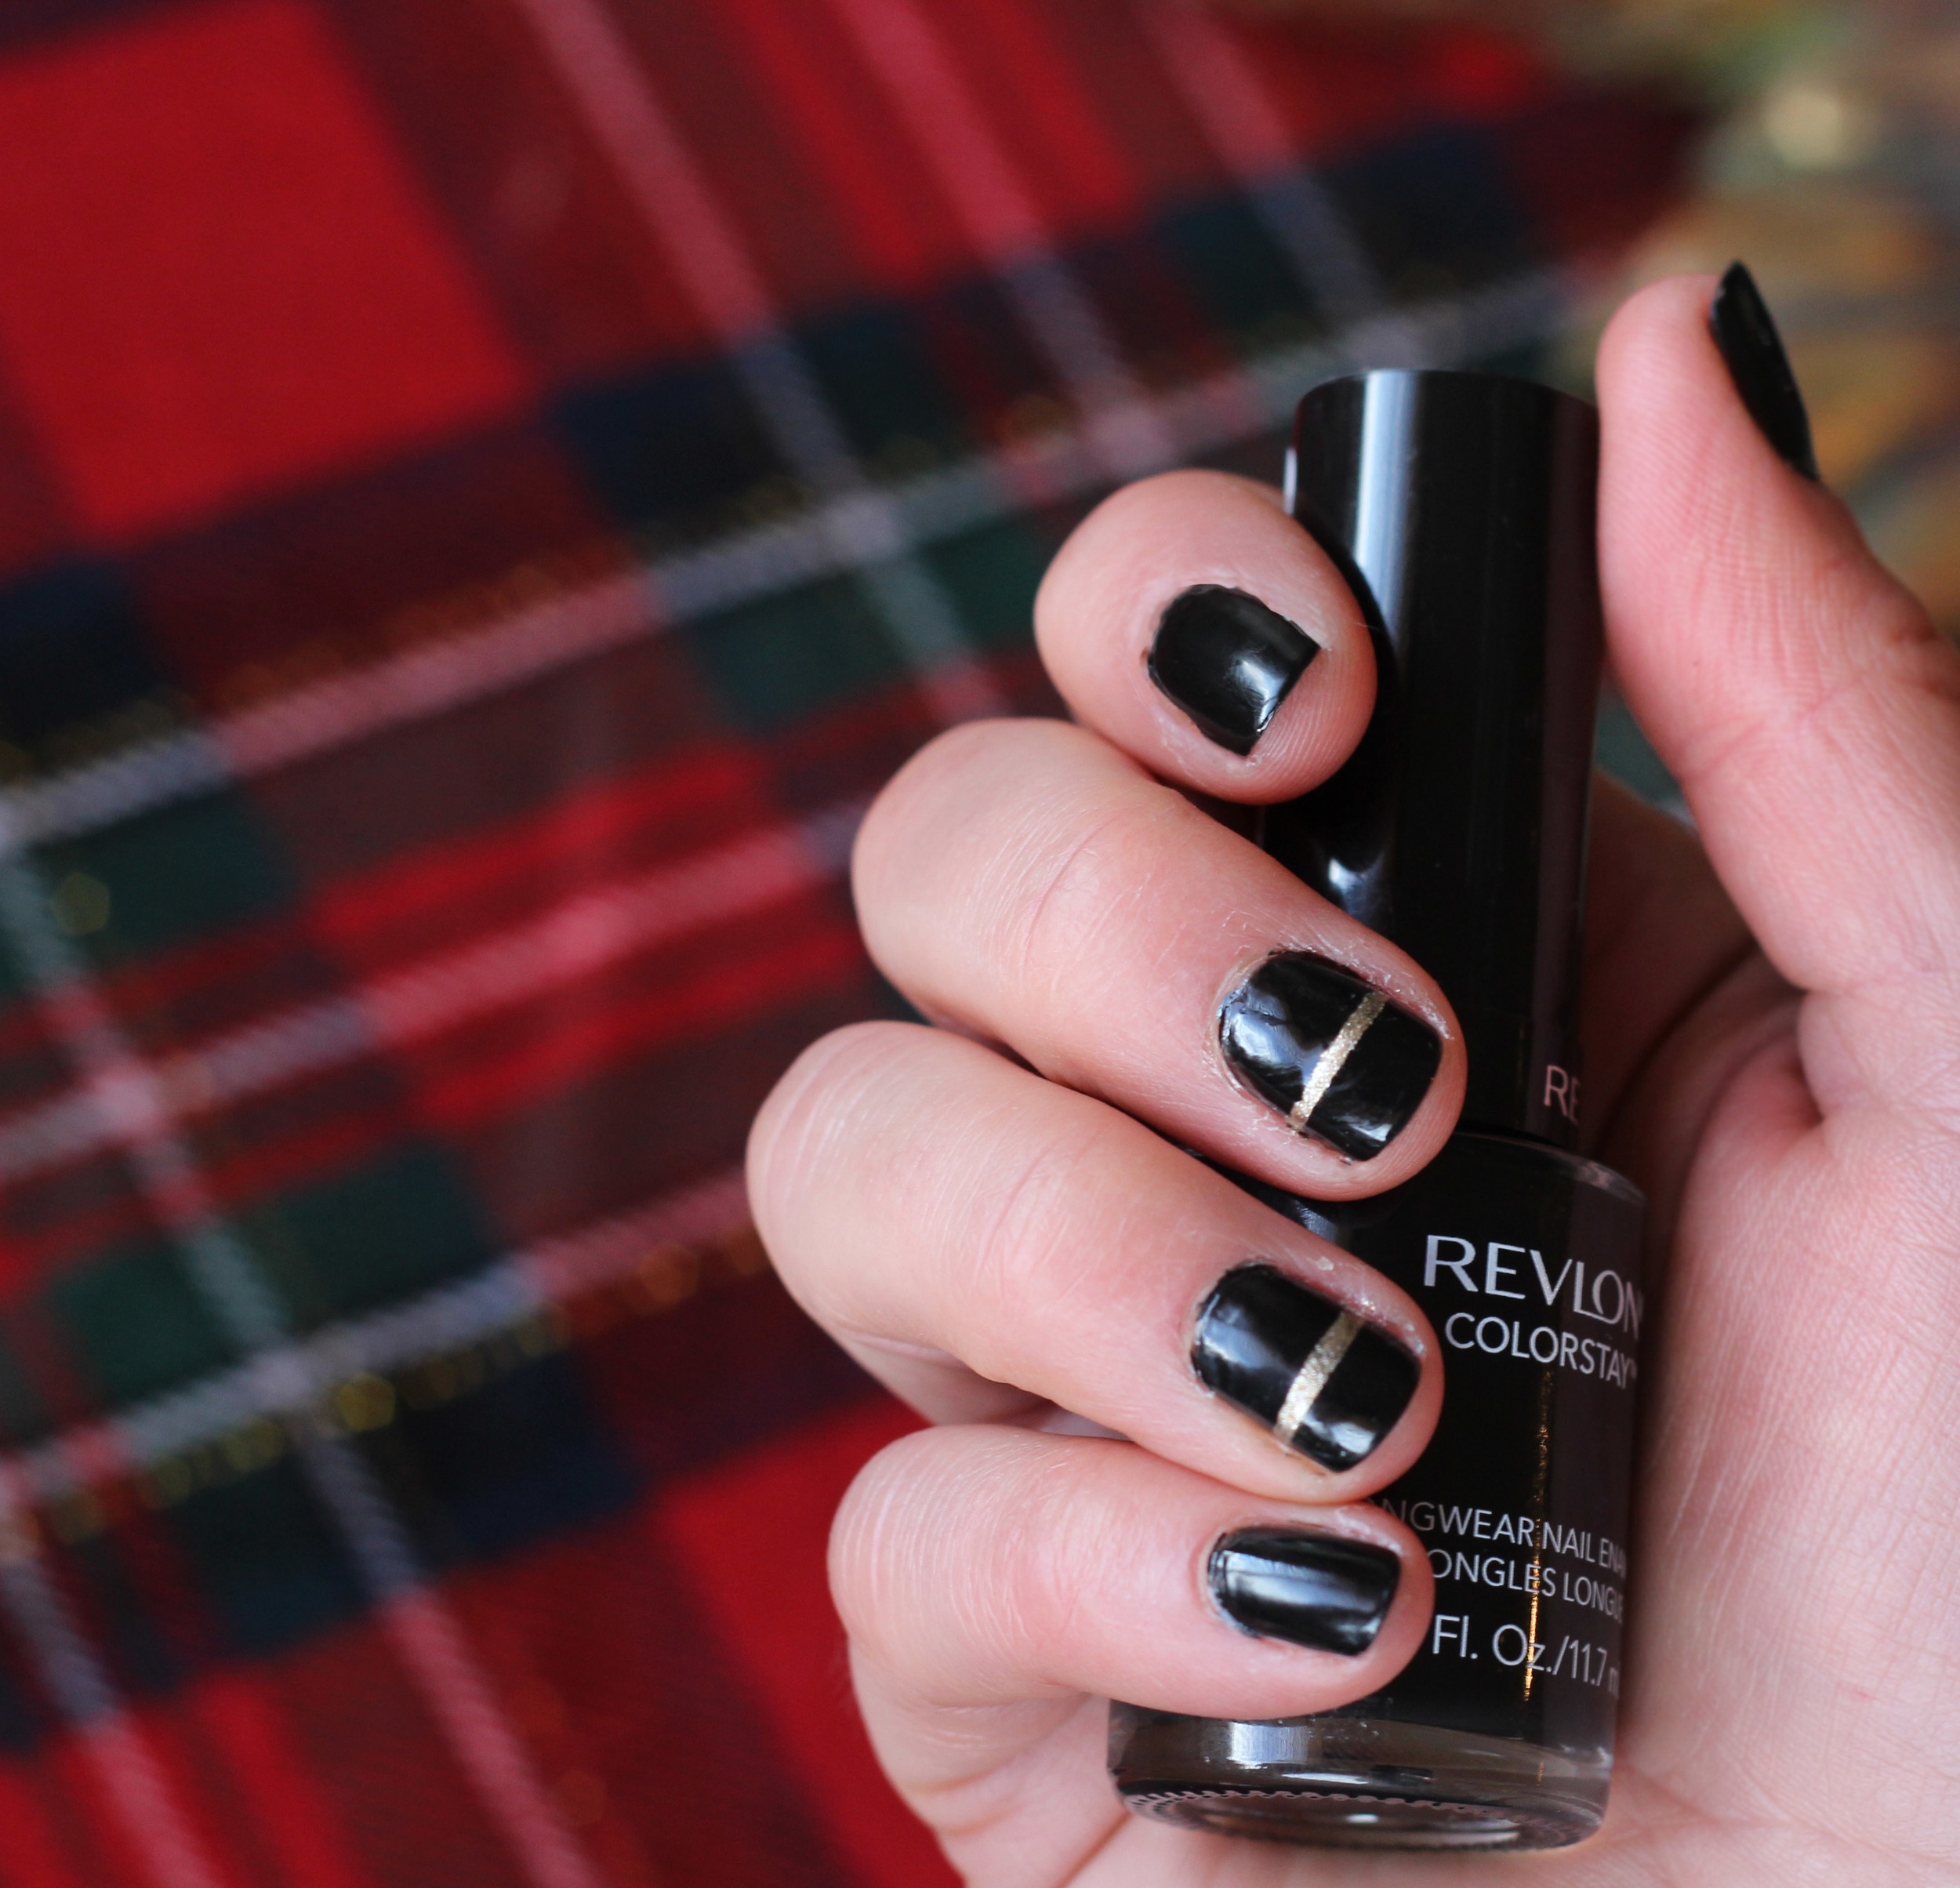 ALU's 365 of Untrieds - Revlon Vixen : All Lacquered Up